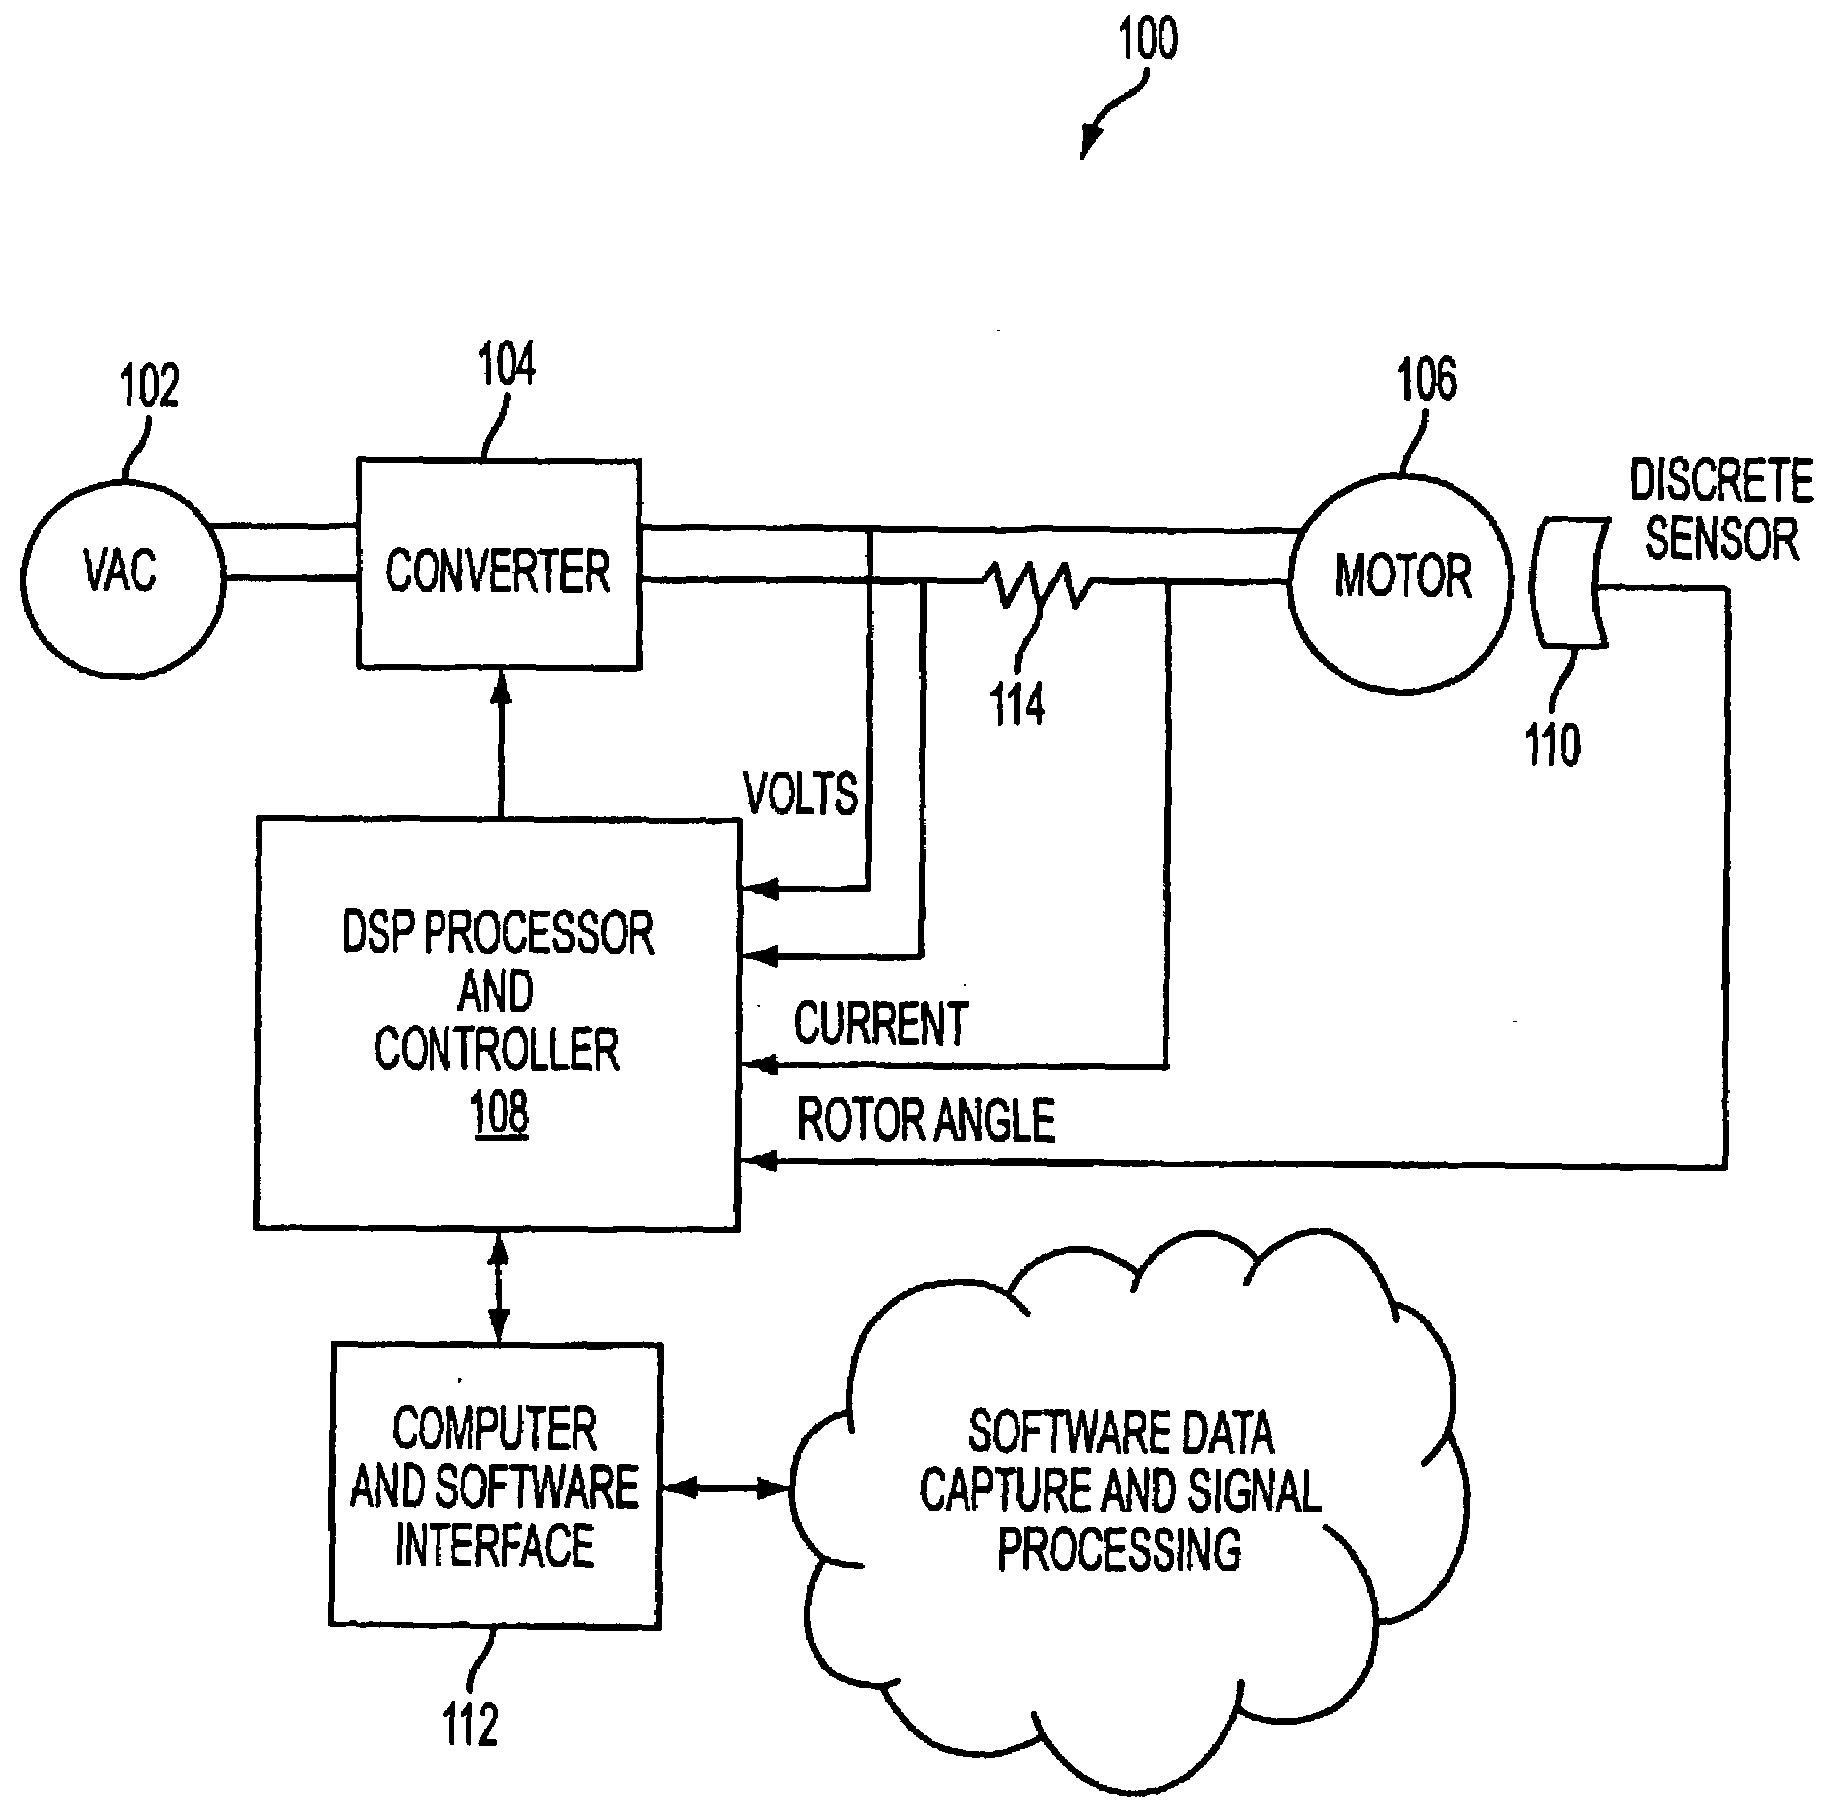 System and Method for Collecting Characteristic Information of a Motor, Neural Network and Method for Estimating Regions of Motor Operation from Information Characterizing the Motor, and System and Method for Controlling Motor